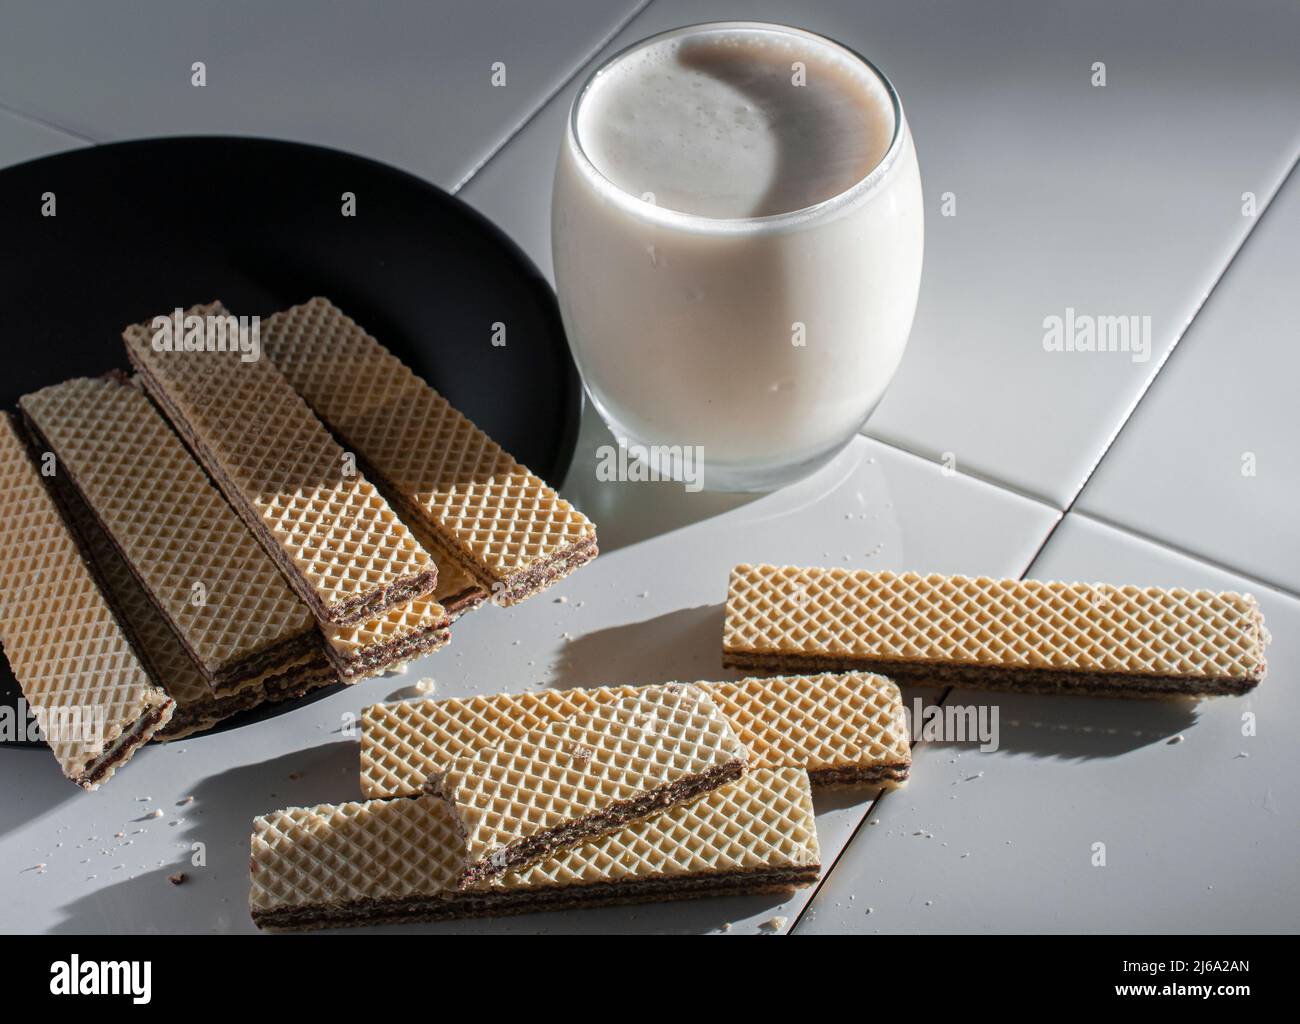 wafer cookies on a black plate and on a white table, with a glass of cold milk on the side lit by the sunlight coming from a window Stock Photo